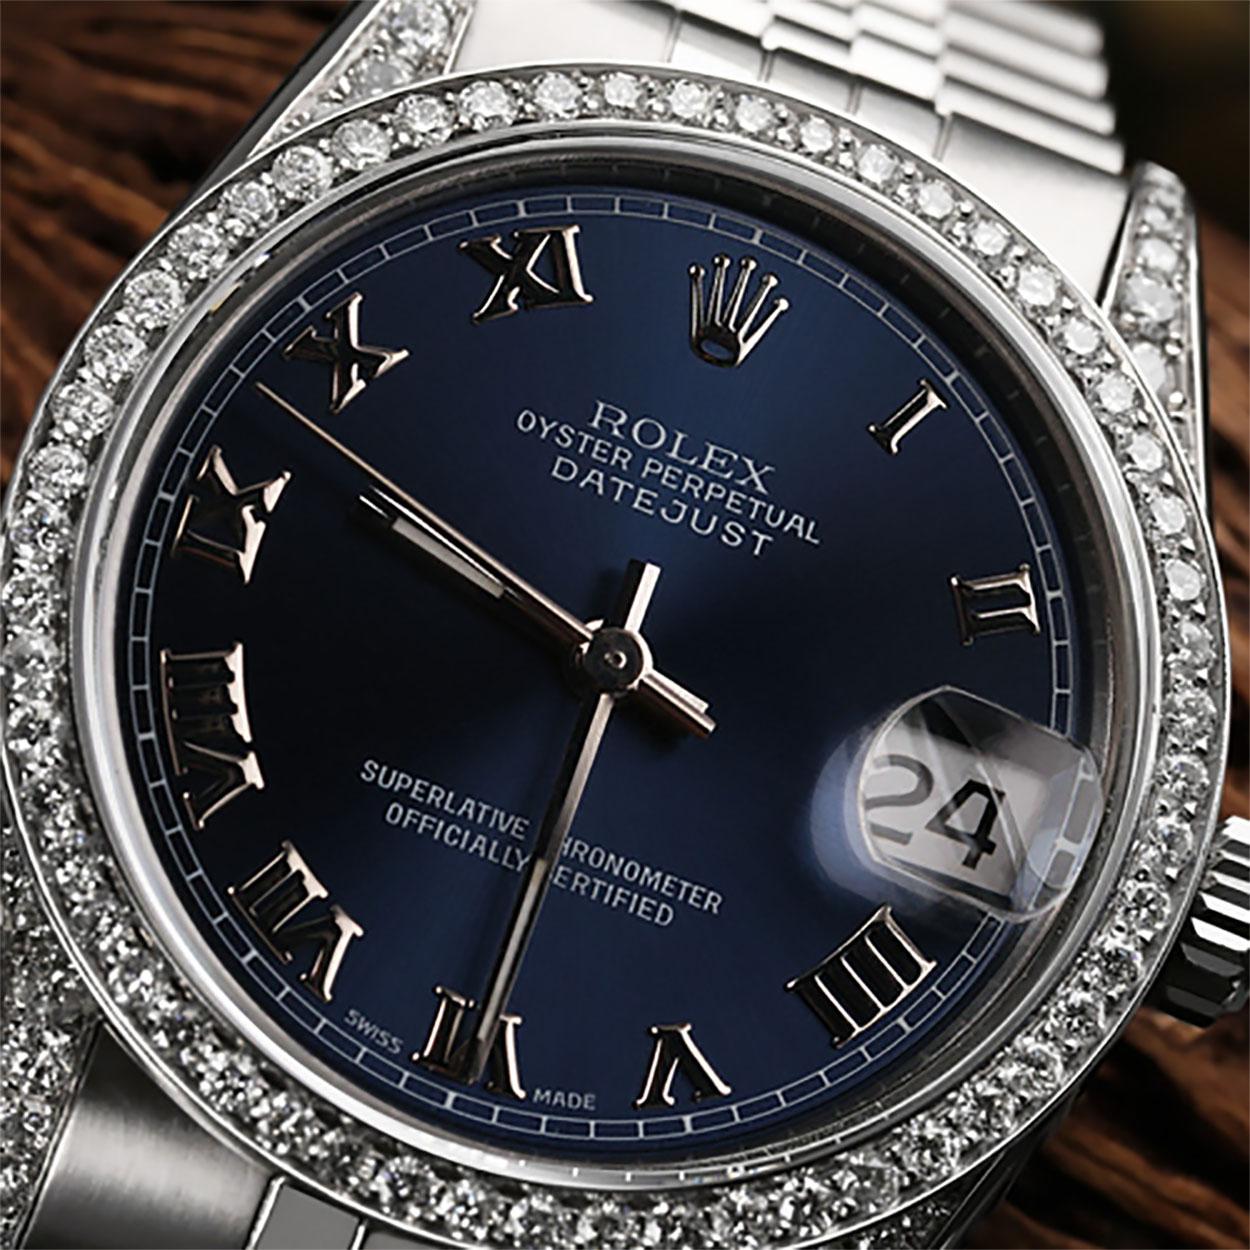 Rolex Datejust 36mm Navy Roman Dial Diamond Bezel & Lugs Stainless Steel Watch.
This watch features aftermarket diamonds (non-Rolex) and is in excellent, like-new condition with no visible scratches or imperfections. Our watches are backed by a